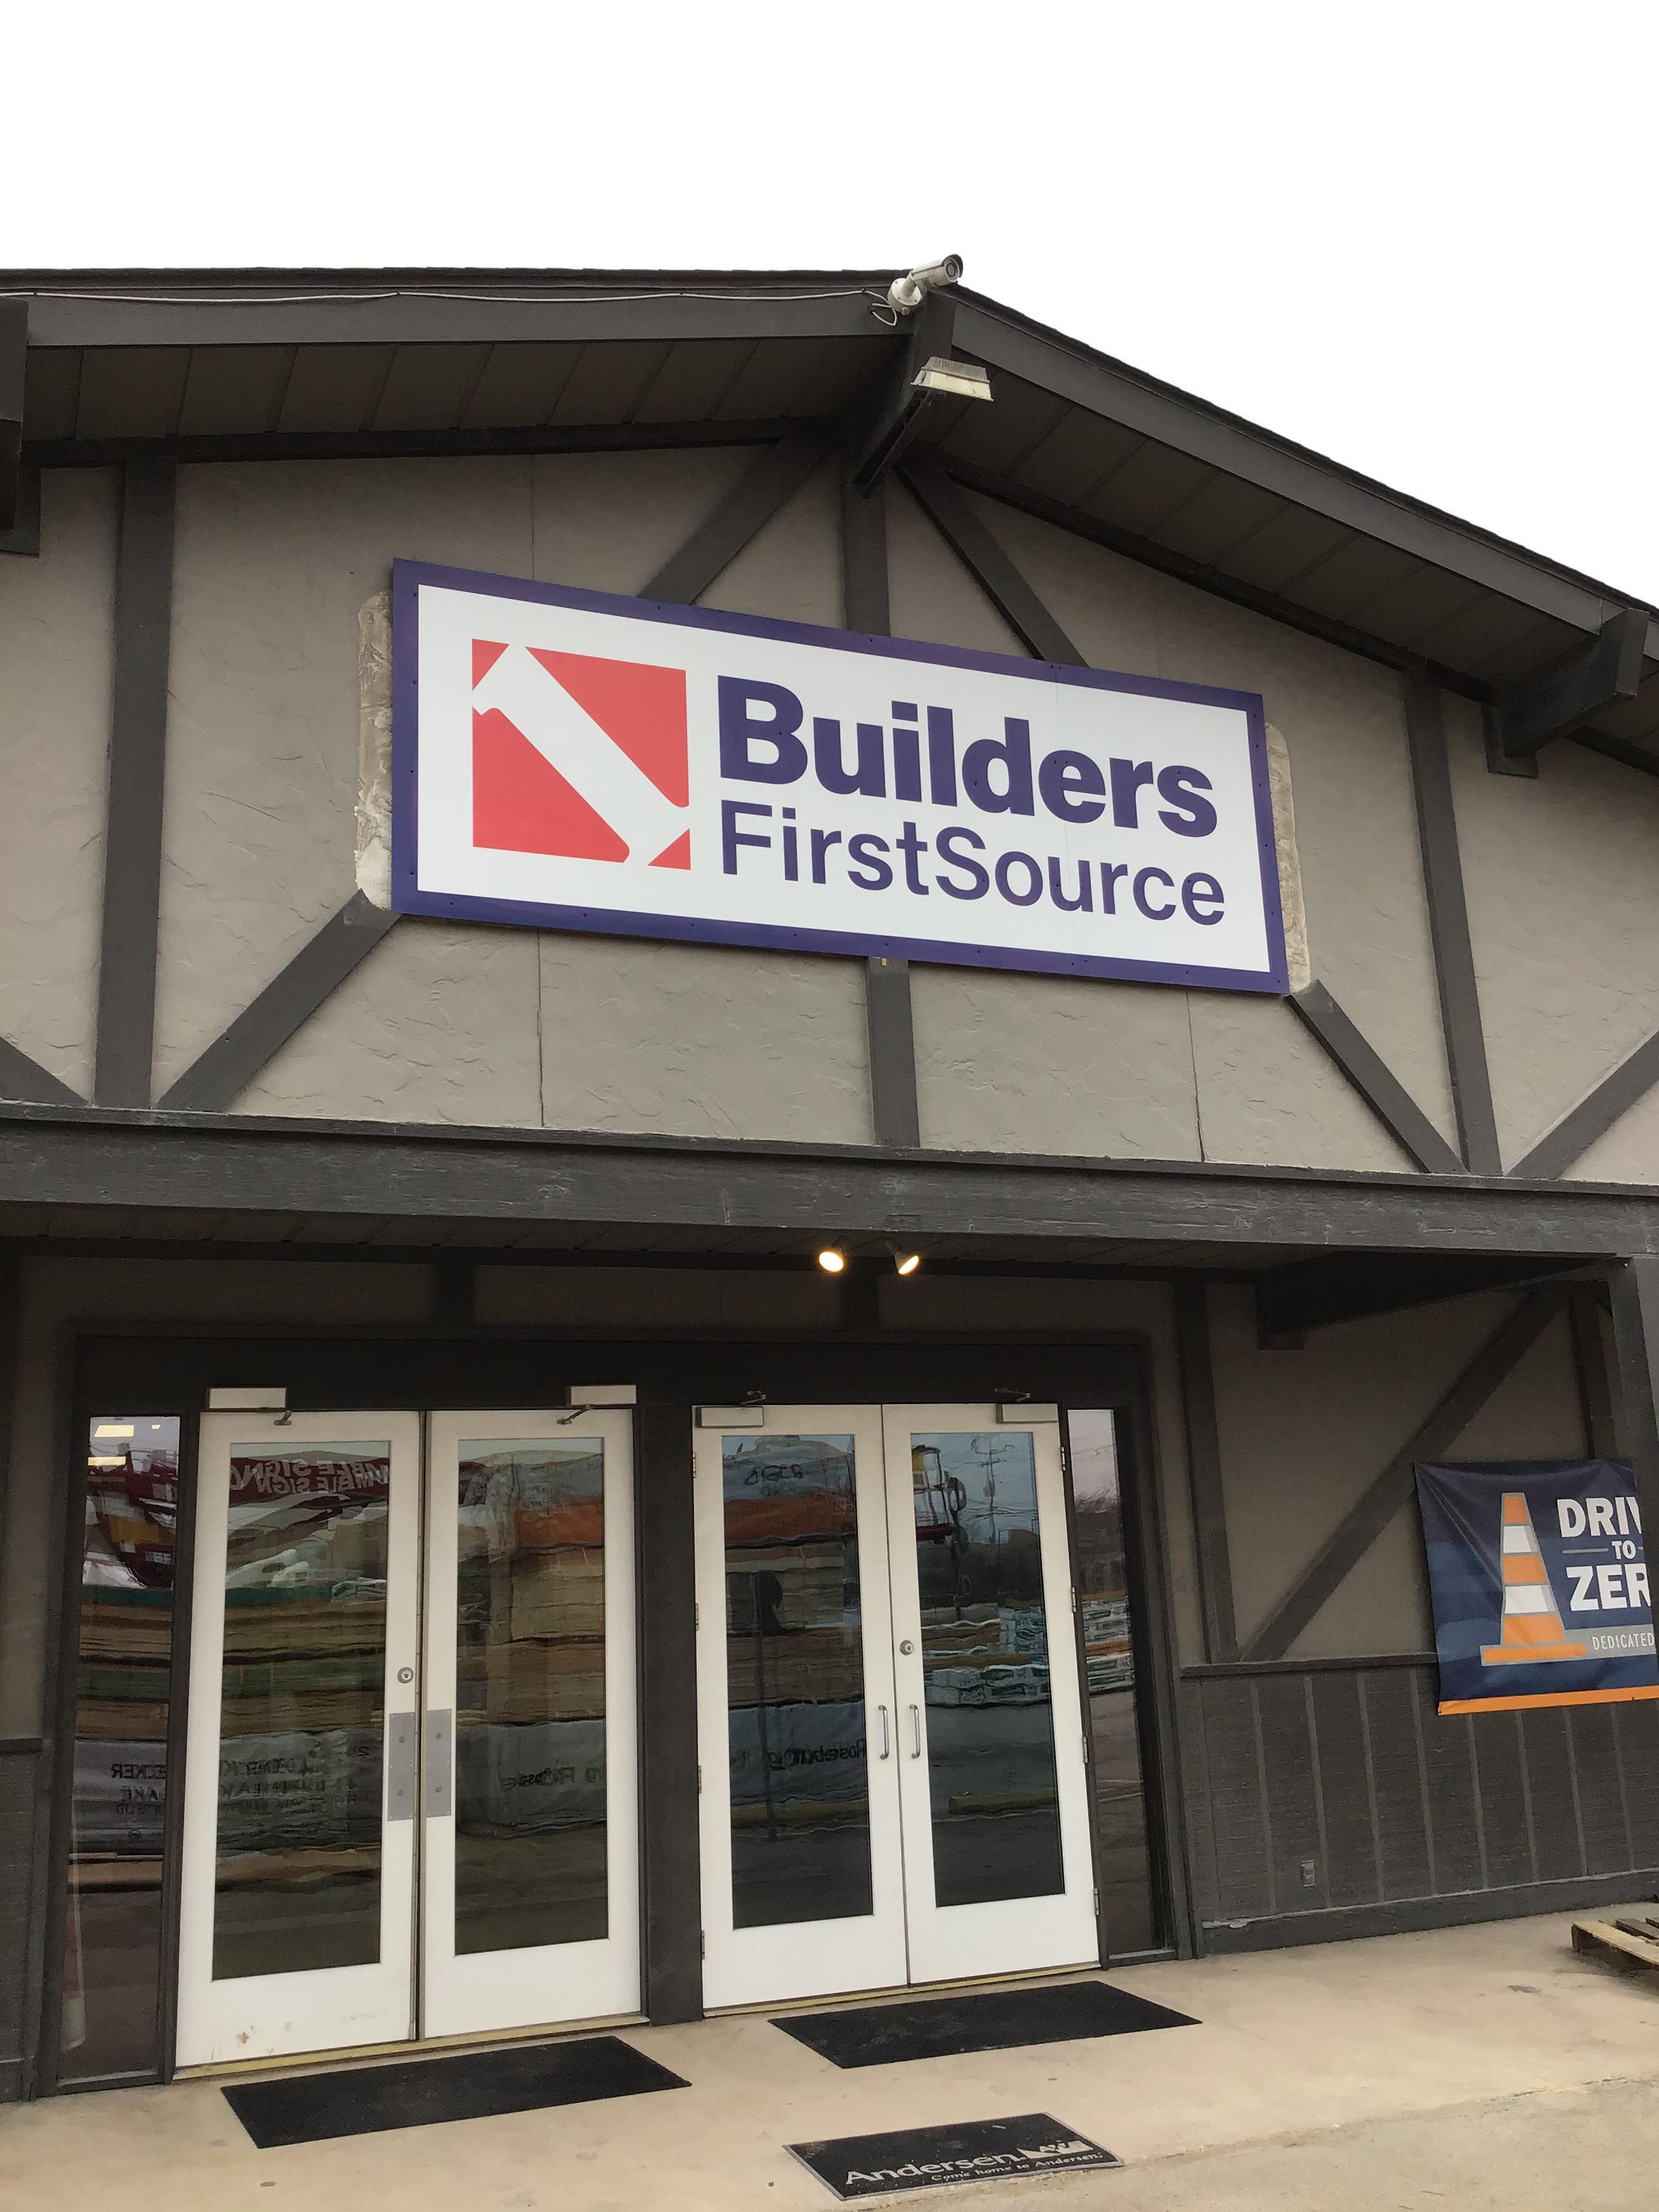 Builders FirstSource lumber yard store front in New Braunfels, TX.